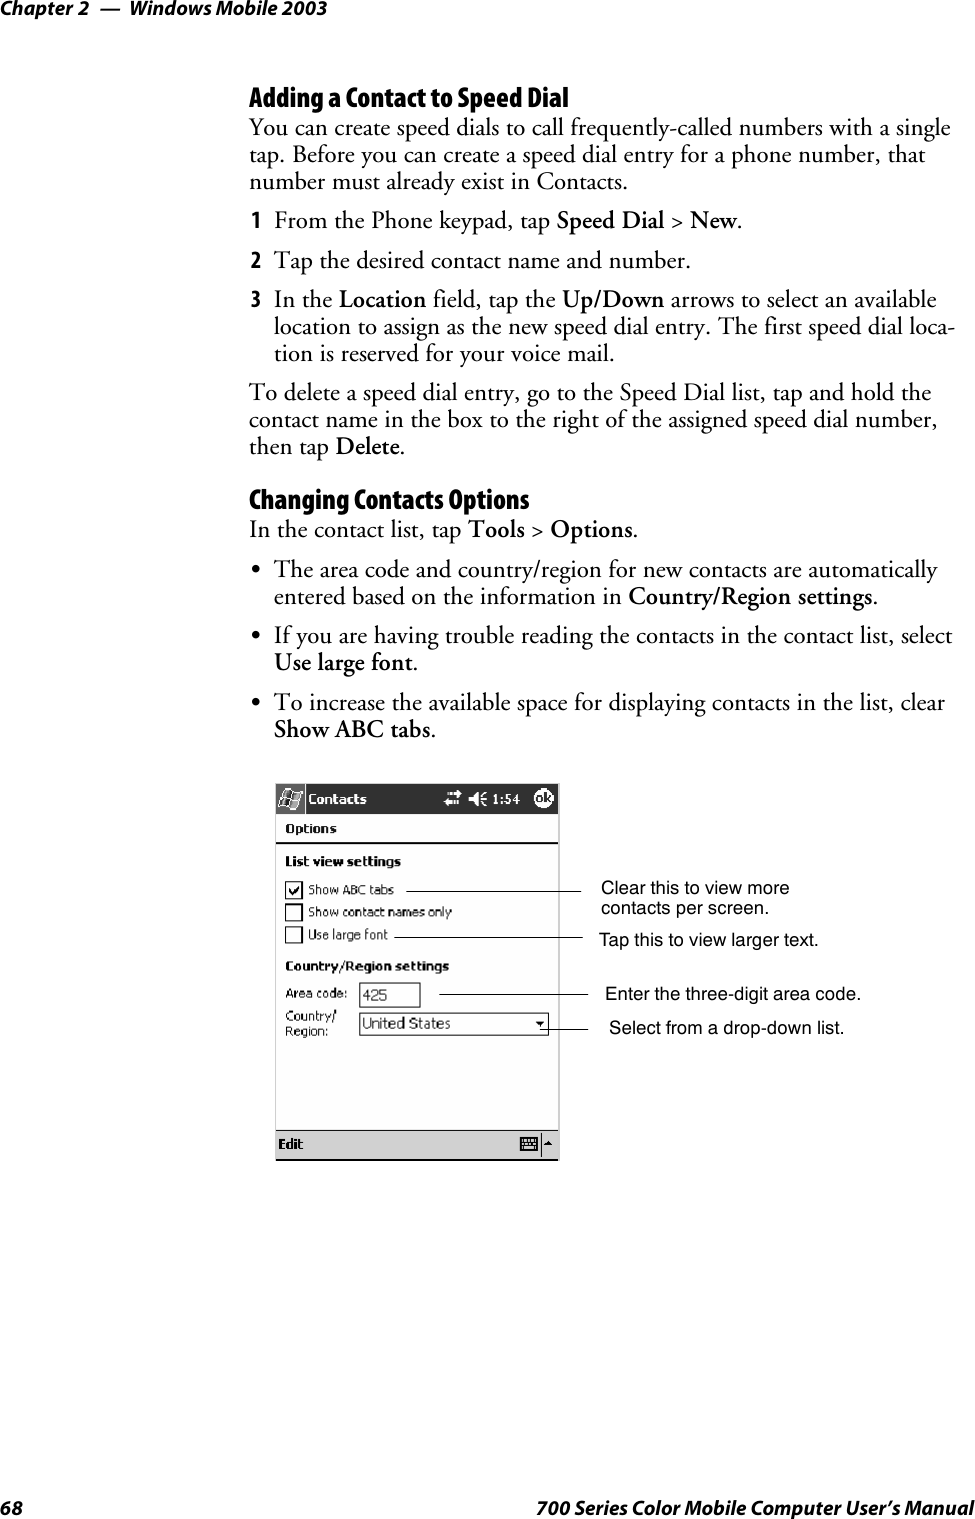 Windows Mobile 2003Chapter —268 700 Series Color Mobile Computer User’s ManualAdding a Contact to Speed DialYou can create speed dials to call frequently-called numbers with a singletap. Before you can create a speed dial entry for a phone number, thatnumber must already exist in Contacts.1From the Phone keypad, tap Speed Dial &gt;New.2Tapthedesiredcontactnameandnumber.3In the Location field, tap the Up/Down arrows to select an availablelocation to assign as the new speed dial entry. The first speed dial loca-tion is reserved for your voice mail.To delete a speed dial entry, go to the Speed Dial list, tap and hold thecontact name in the box to the right of the assigned speed dial number,then tap Delete.Changing Contacts OptionsIn the contact list, tap Tools &gt;Options.SThe area code and country/region for new contacts are automaticallyentered based on the information in Country/Region settings.SIf you are having trouble reading the contacts in the contact list, selectUse large font.STo increase the available space for displaying contacts in the list, clearShow ABC tabs.Enter the three-digit area code.Select from a drop-down list.Tap this to view larger text.Clear this to view morecontacts per screen.